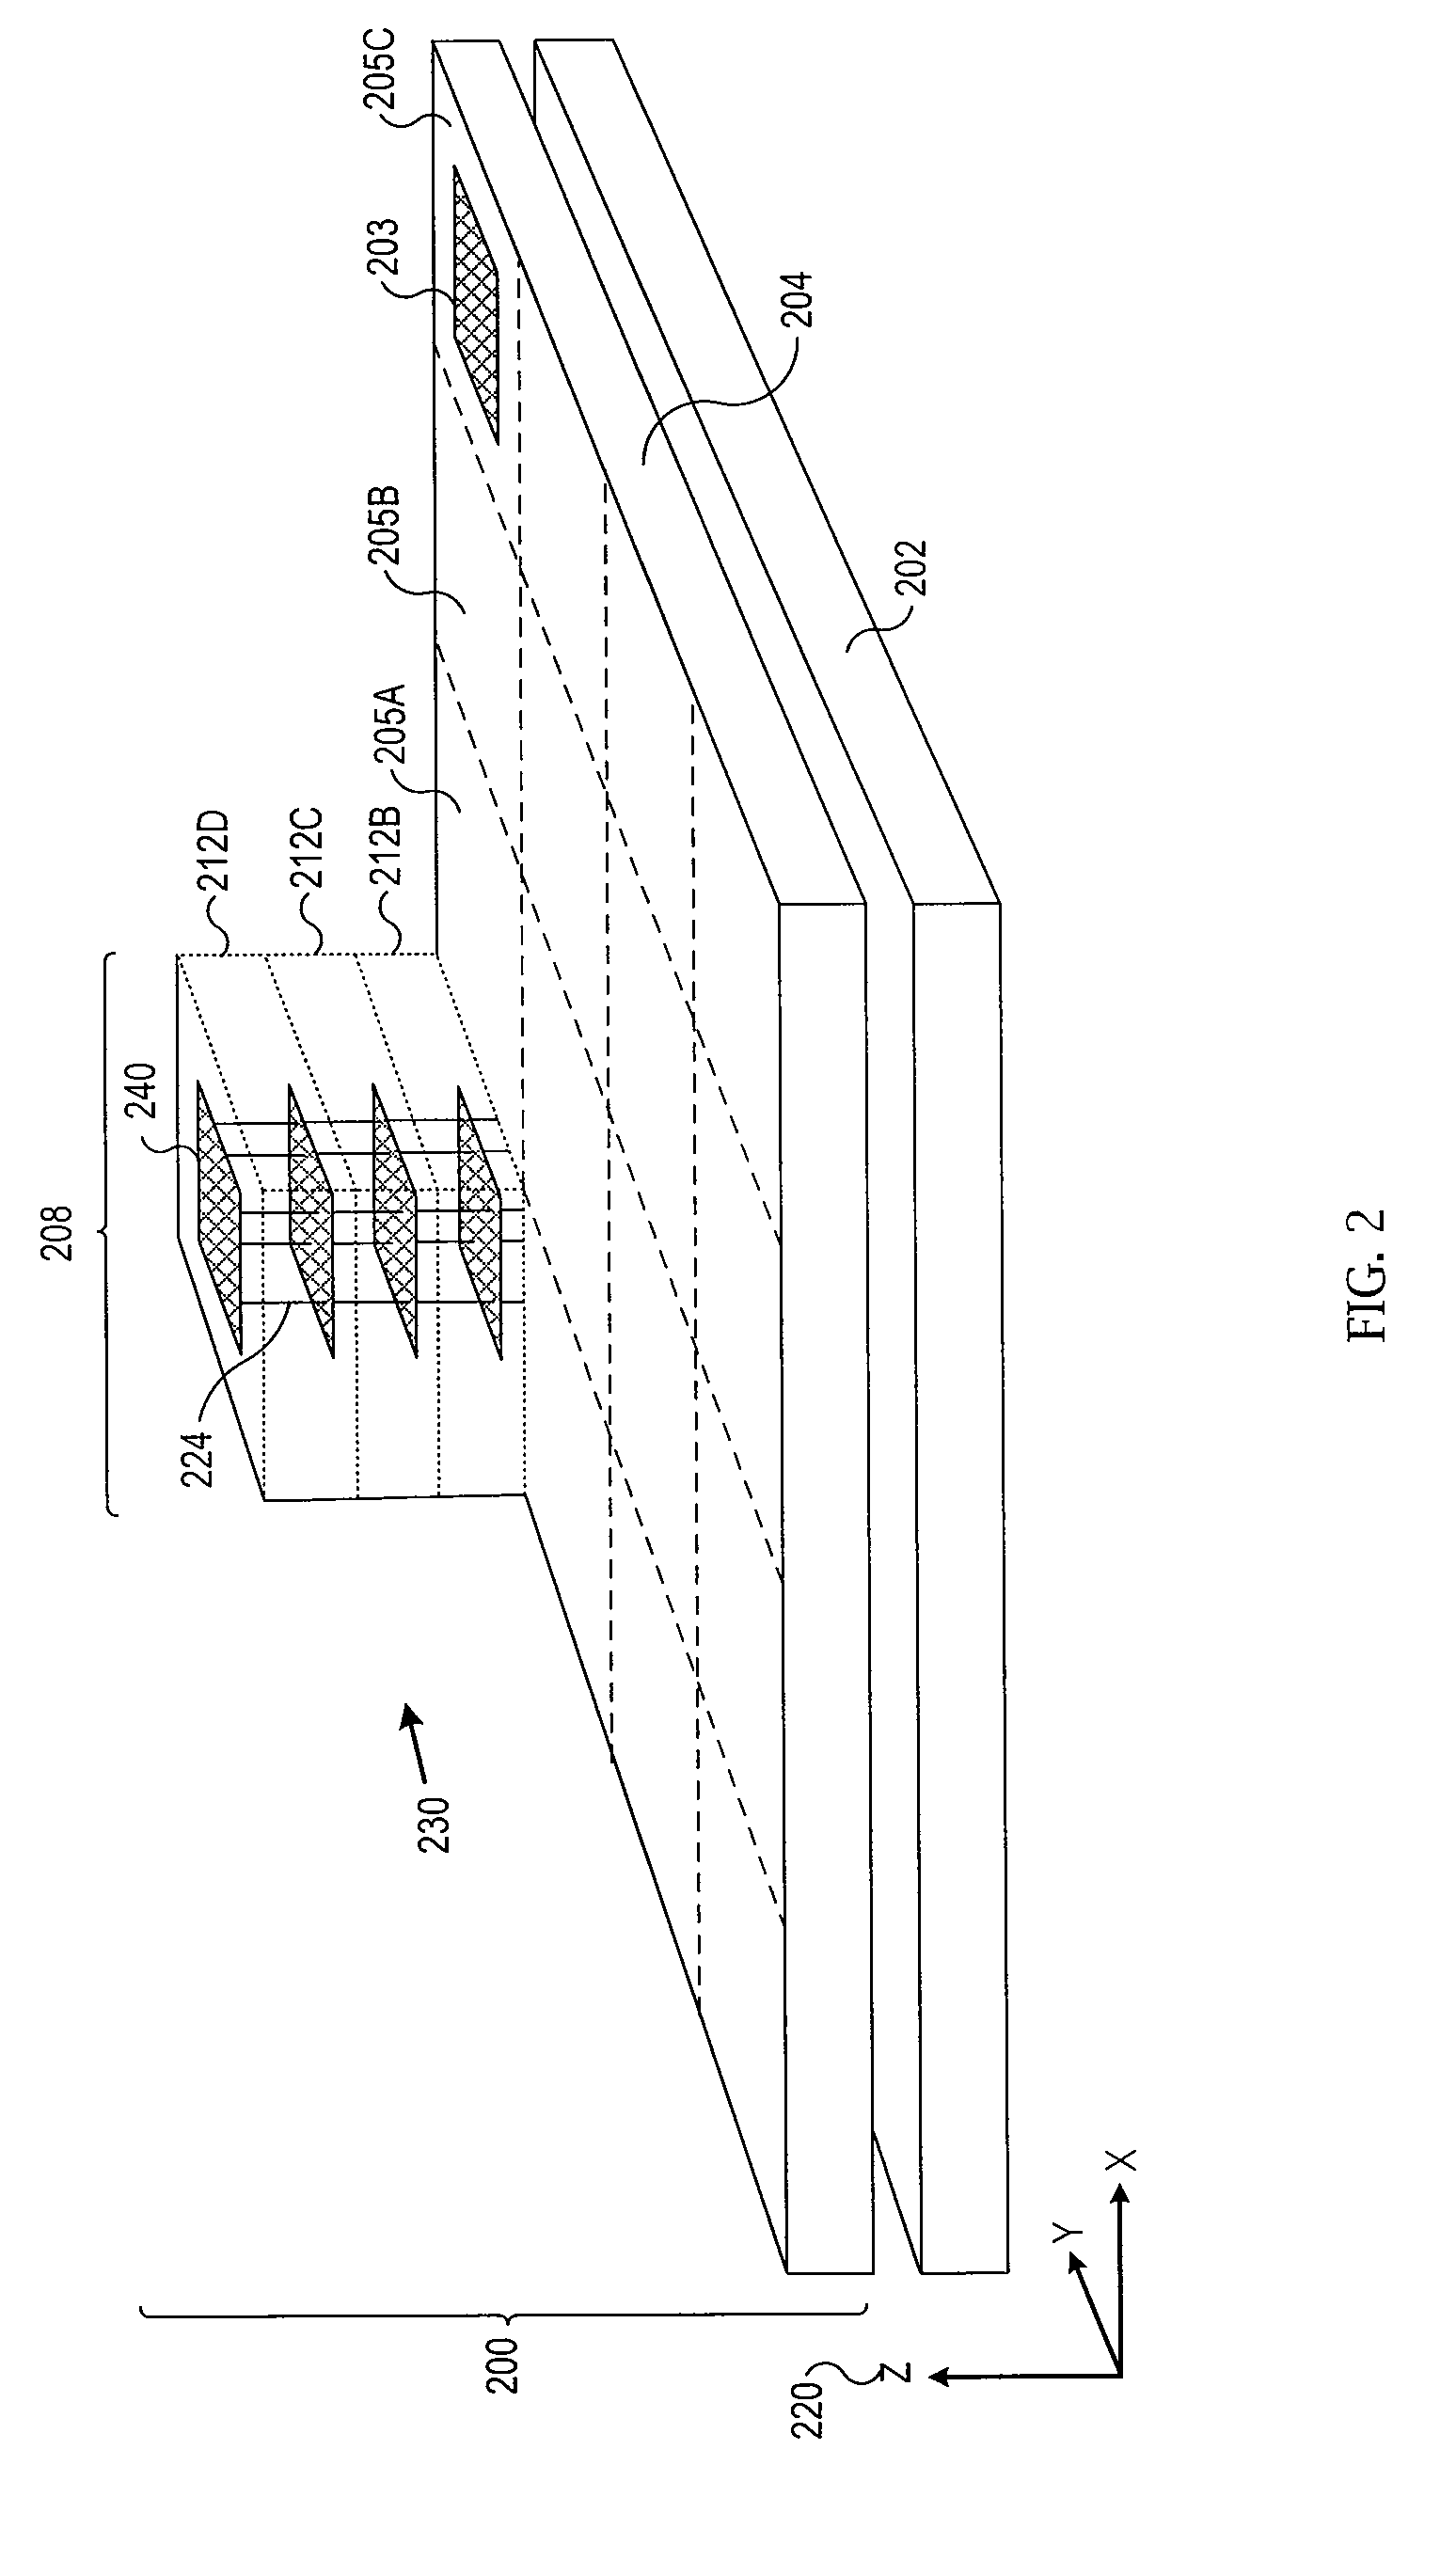 Systems and methods for monitoring a memory system